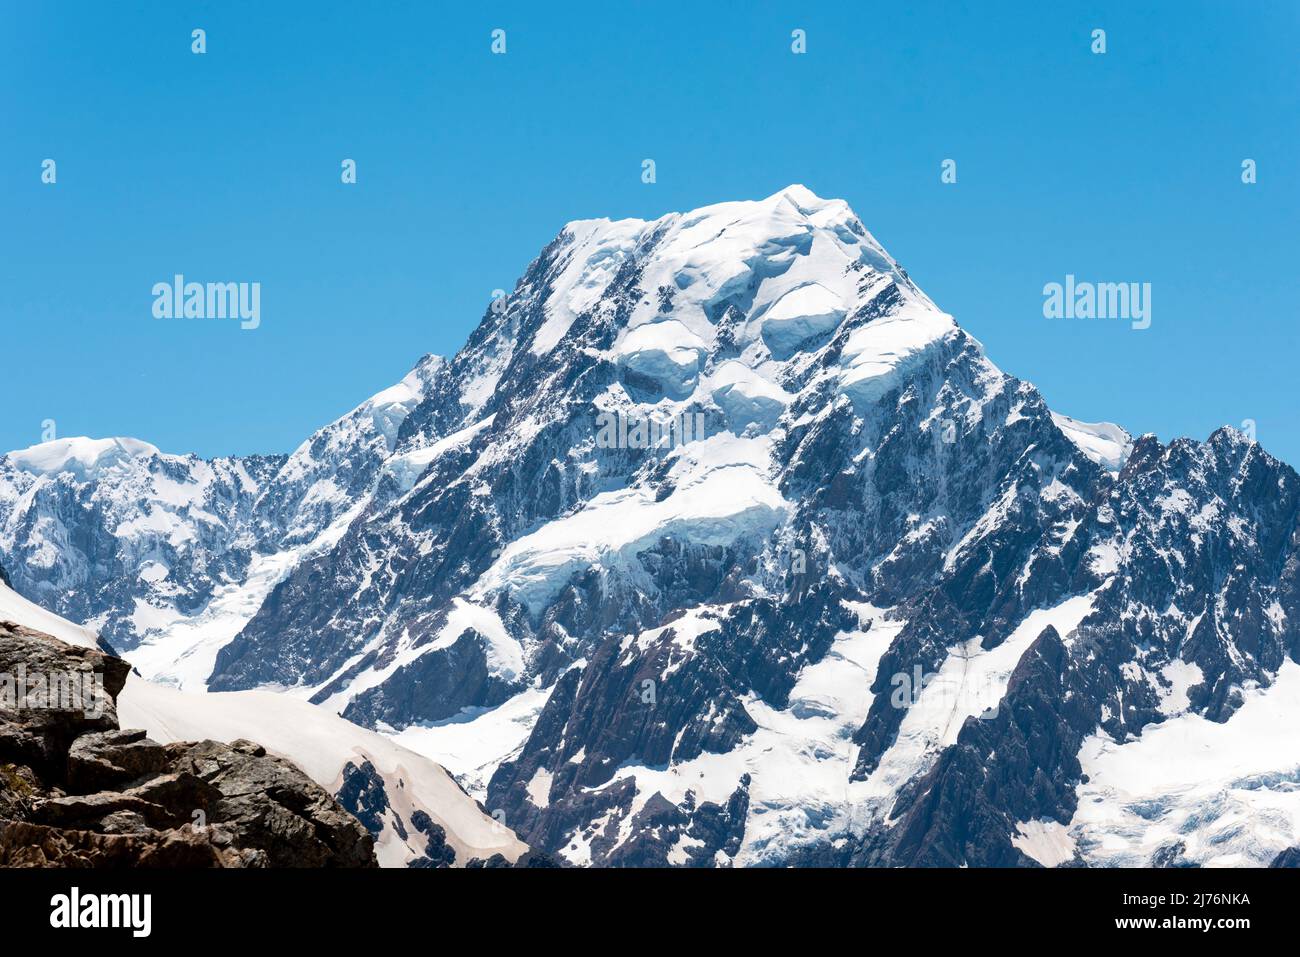 Scenic view of Mount Cook from Mueller Hut Route, Mount Cook National Park, South Island of New Zealand Stock Photo